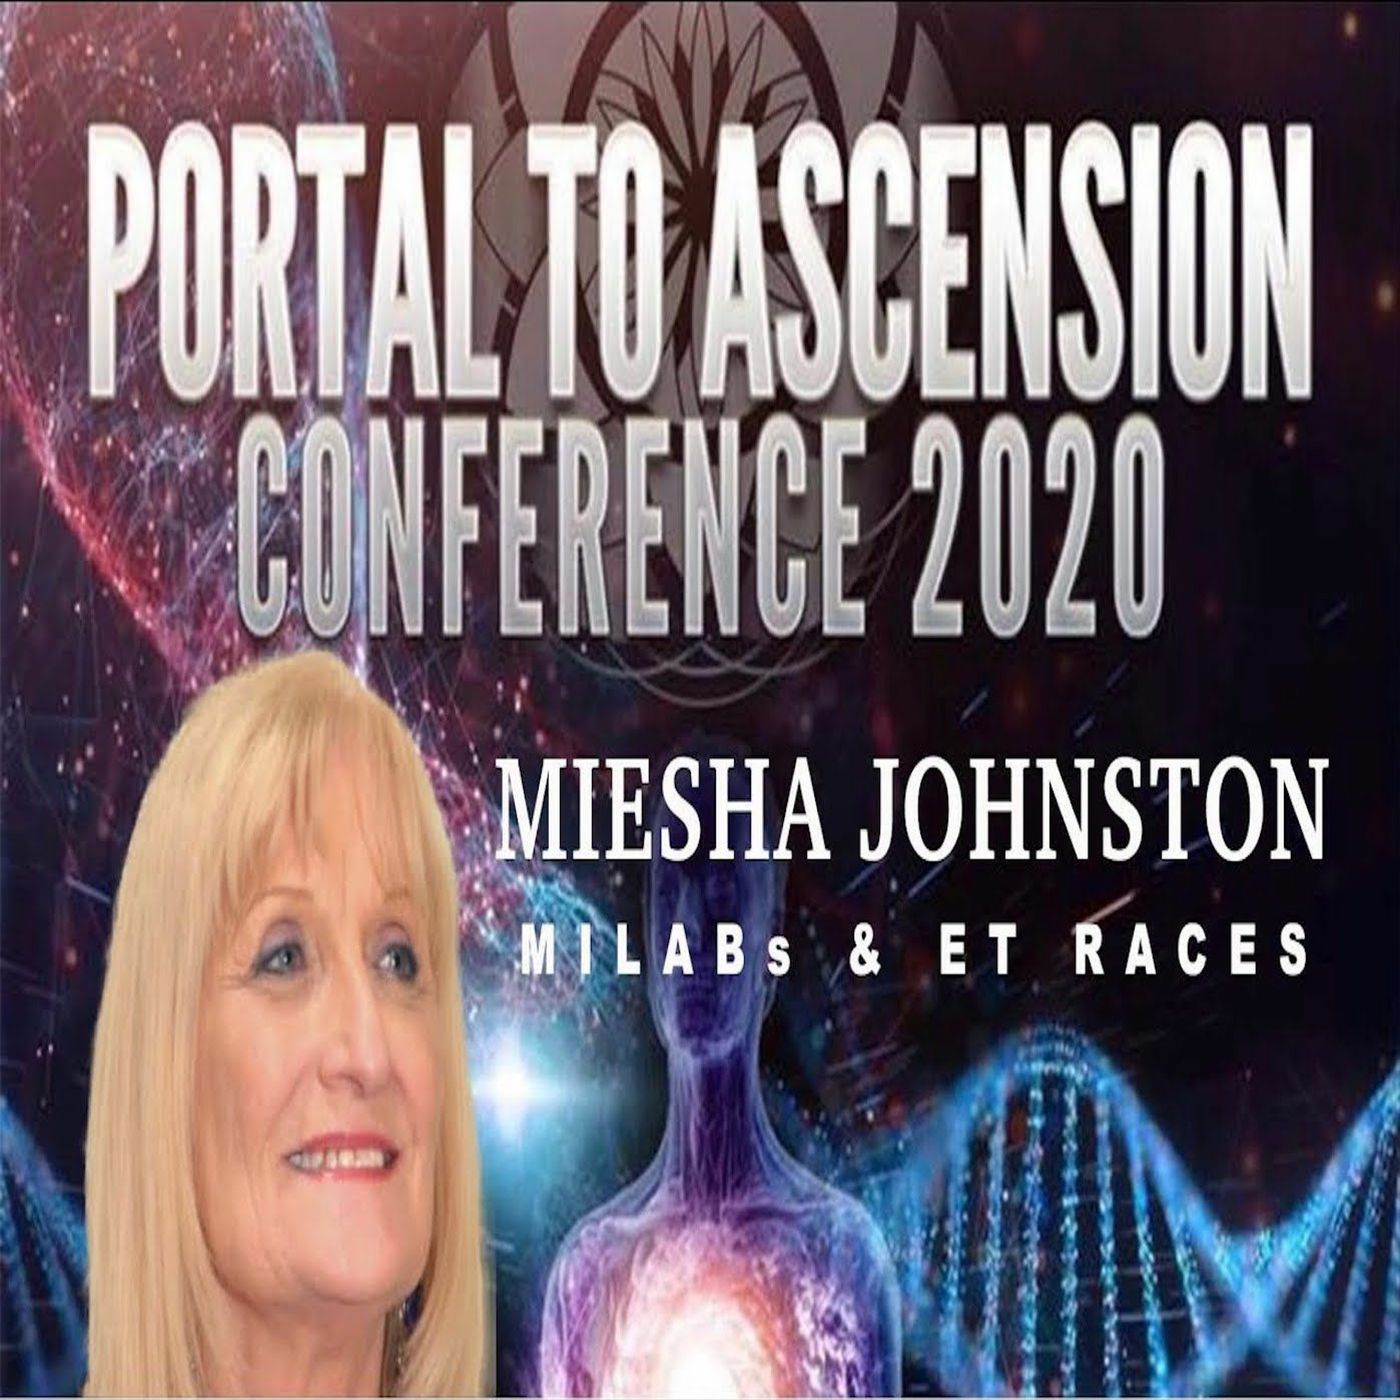 Portal To Ascension 2020 - Miesha Johnston & Journey To Truth - MILABs & ET Races